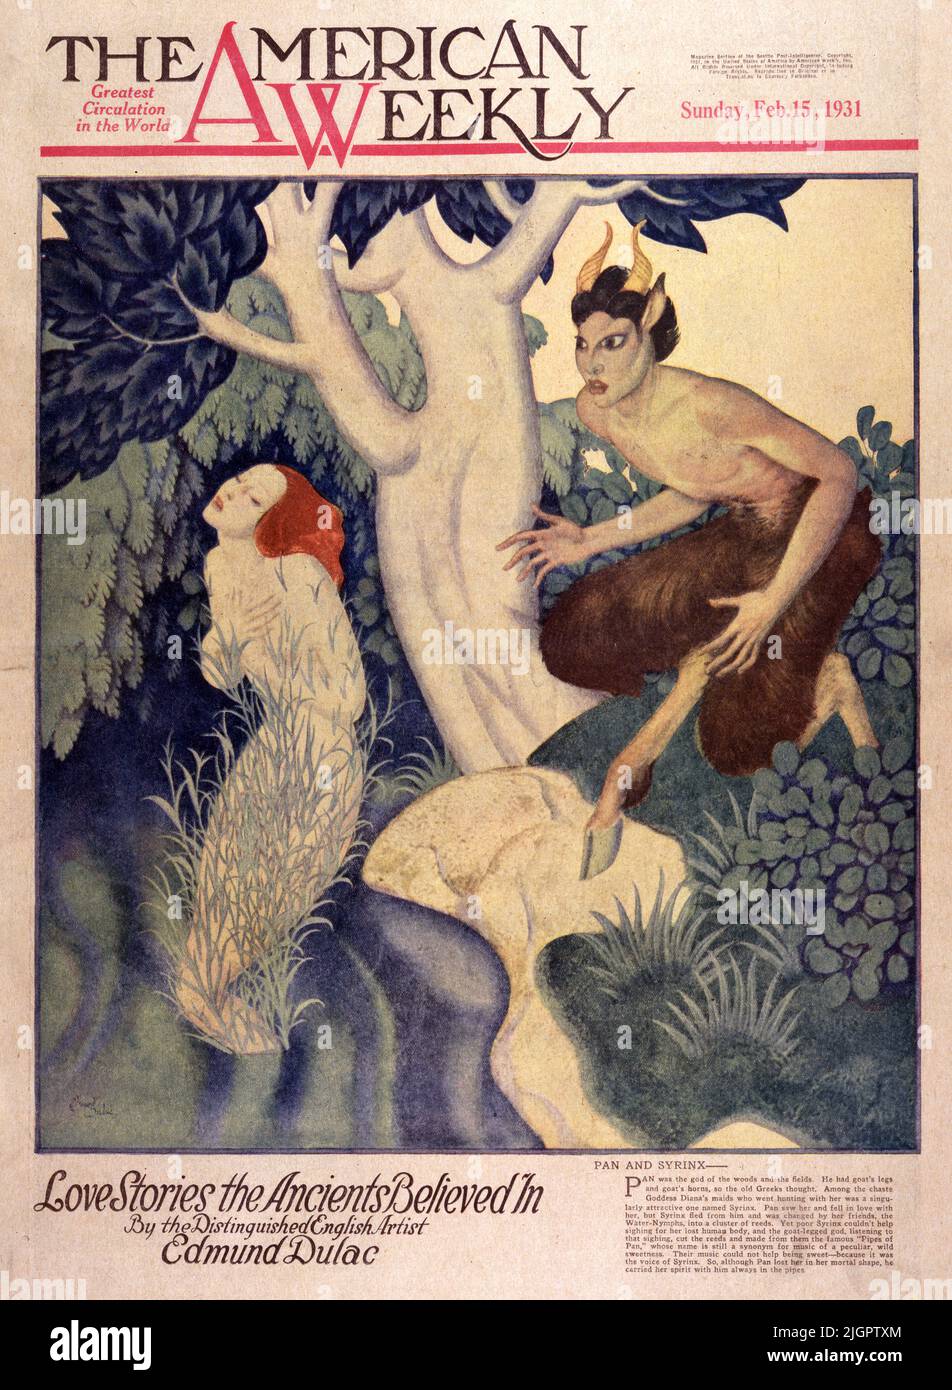 'Pan and Syrinx' published on Feb.15,1931 in the American Weekly magazine painted by Edmund Dulac. Pan was the god of the woods and the fields. He has goat’s legs and goat’s horns, so the old Greeks thought. Among the chaste Goddess Diana’s maids who went hunting with her was a singularly attractive one named Syrinx. Pan saw and and fell in love with her, but Syrinx fled from him and was changed by her friends, the Water-Nymphs, into a cluster of reeds. Yet poor Syrinx couldn’t help sighing for her lost body, and the goat legged god cut the reeds and made from them the famous Pipes of Pan. Stock Photo